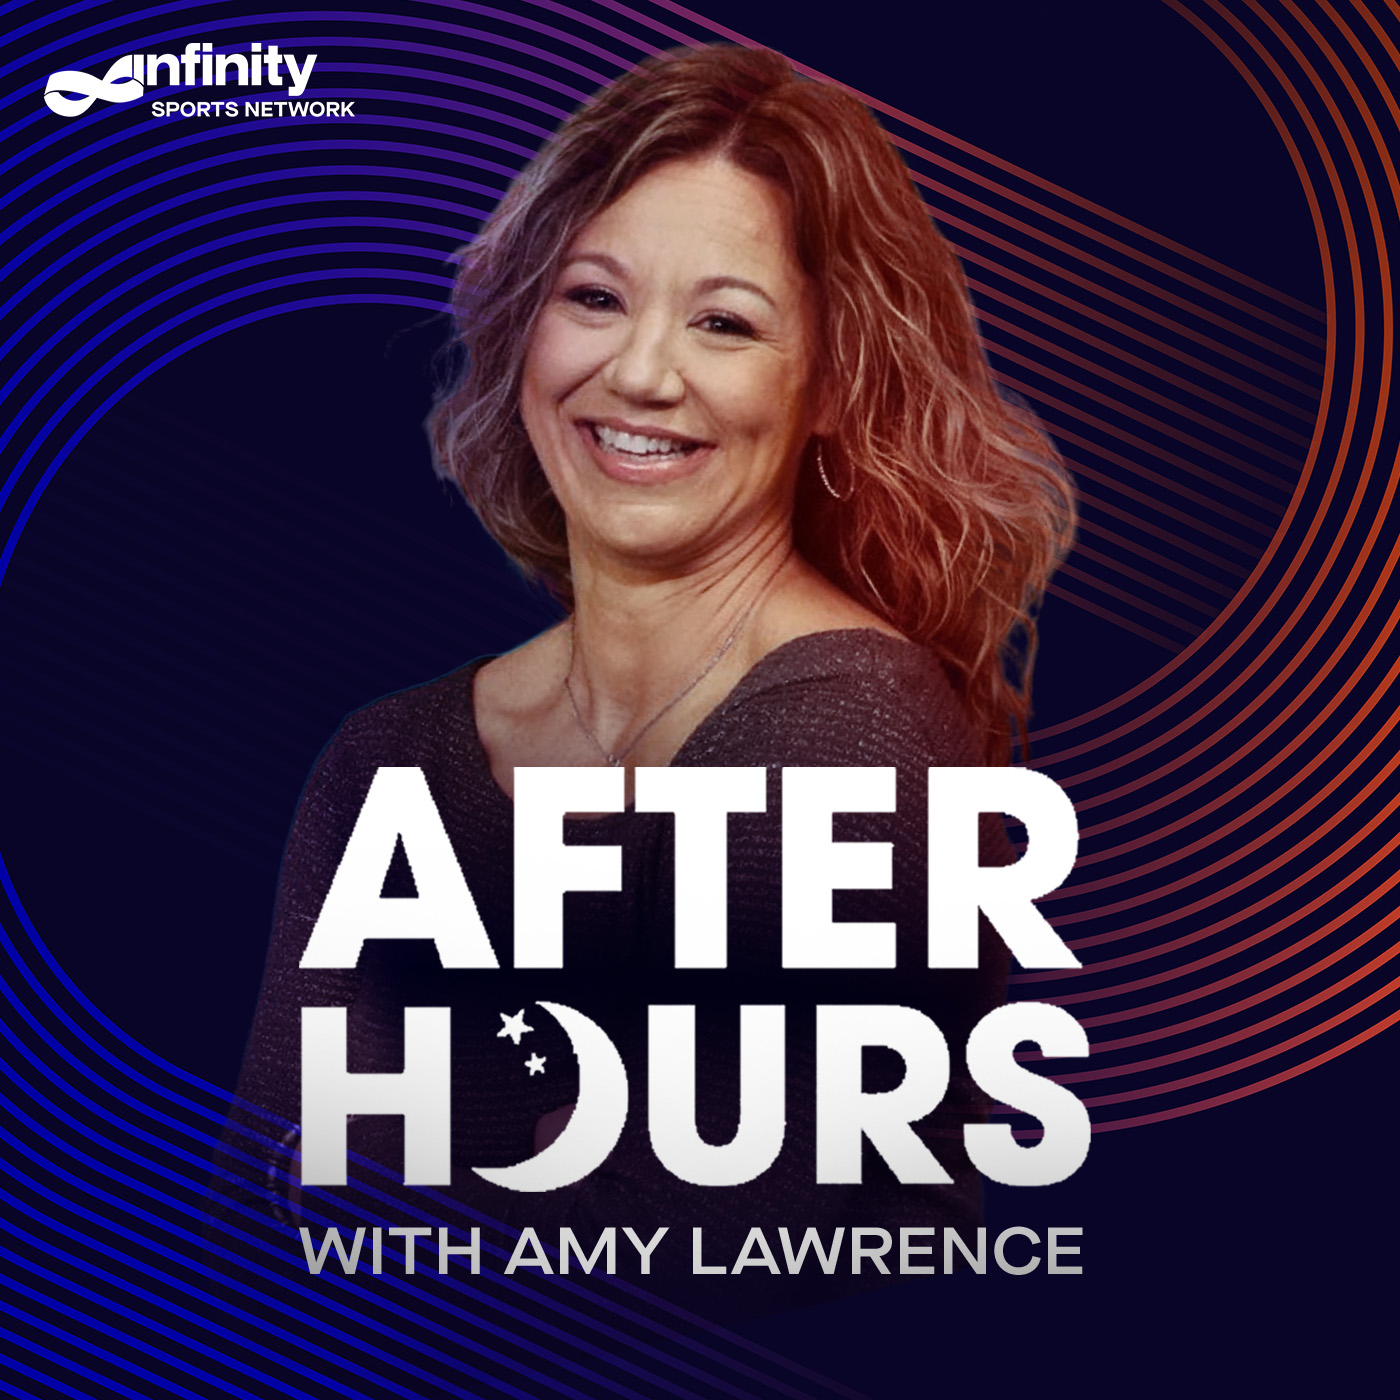 8-31-21 After Hours with Amy Lawrence PODCAST: Hour 2